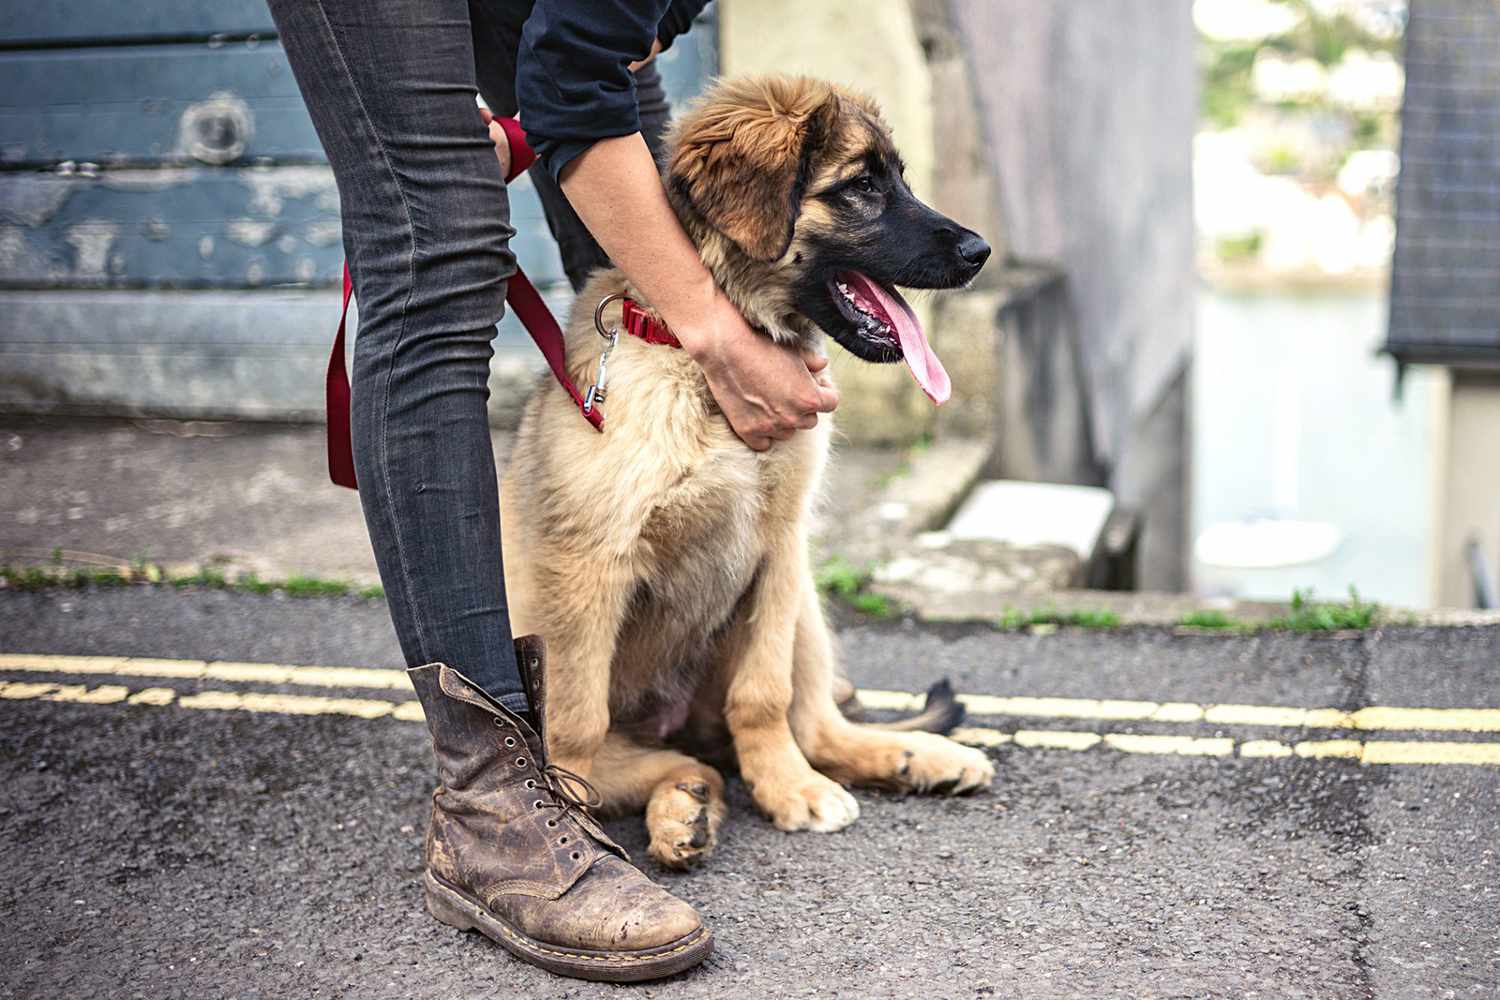 owner wearing black jeans petting their leonberger puppy on a street